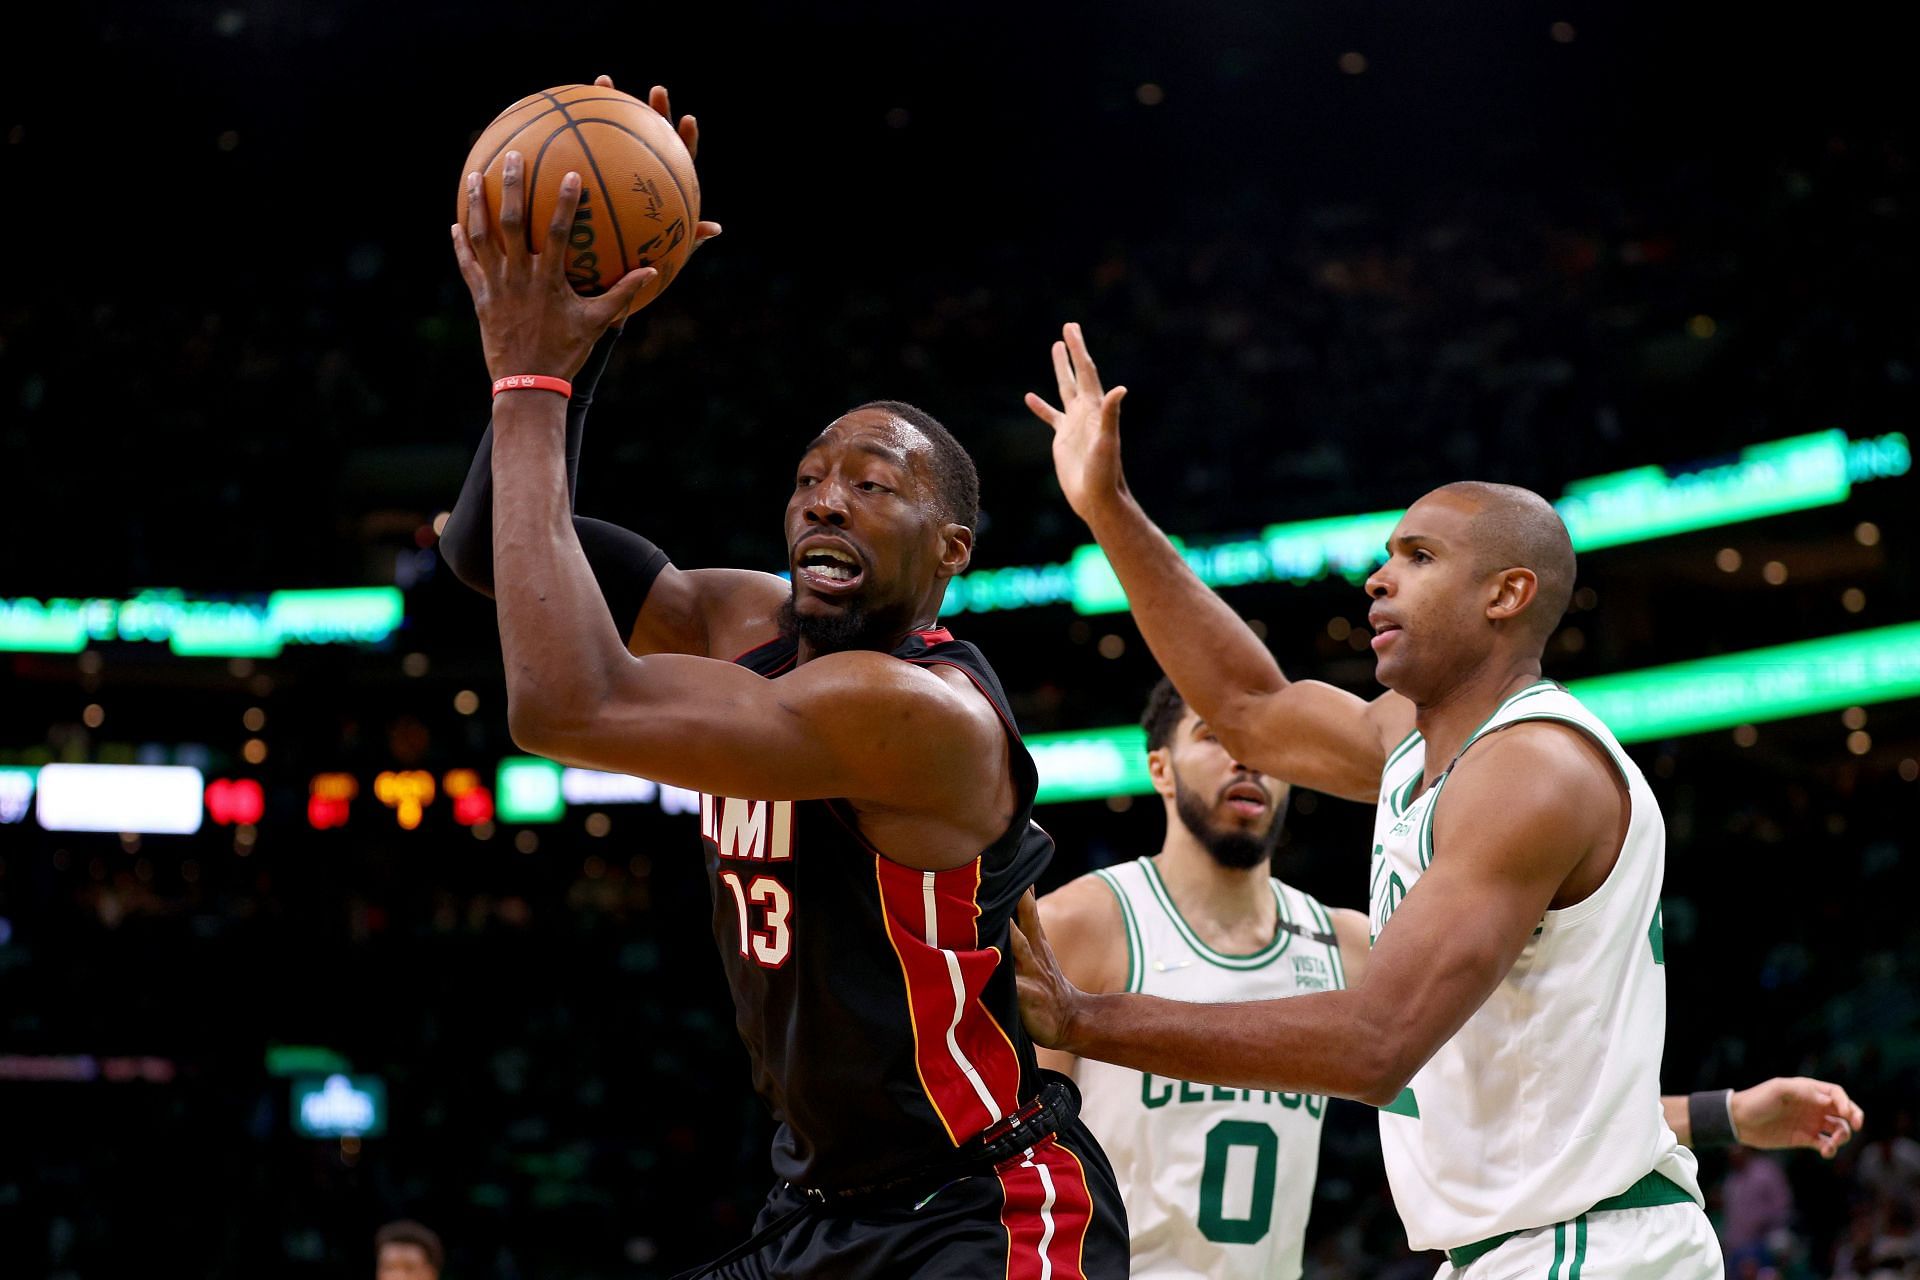 Bam Adebayo attempts to shoot the ball against Al Horford